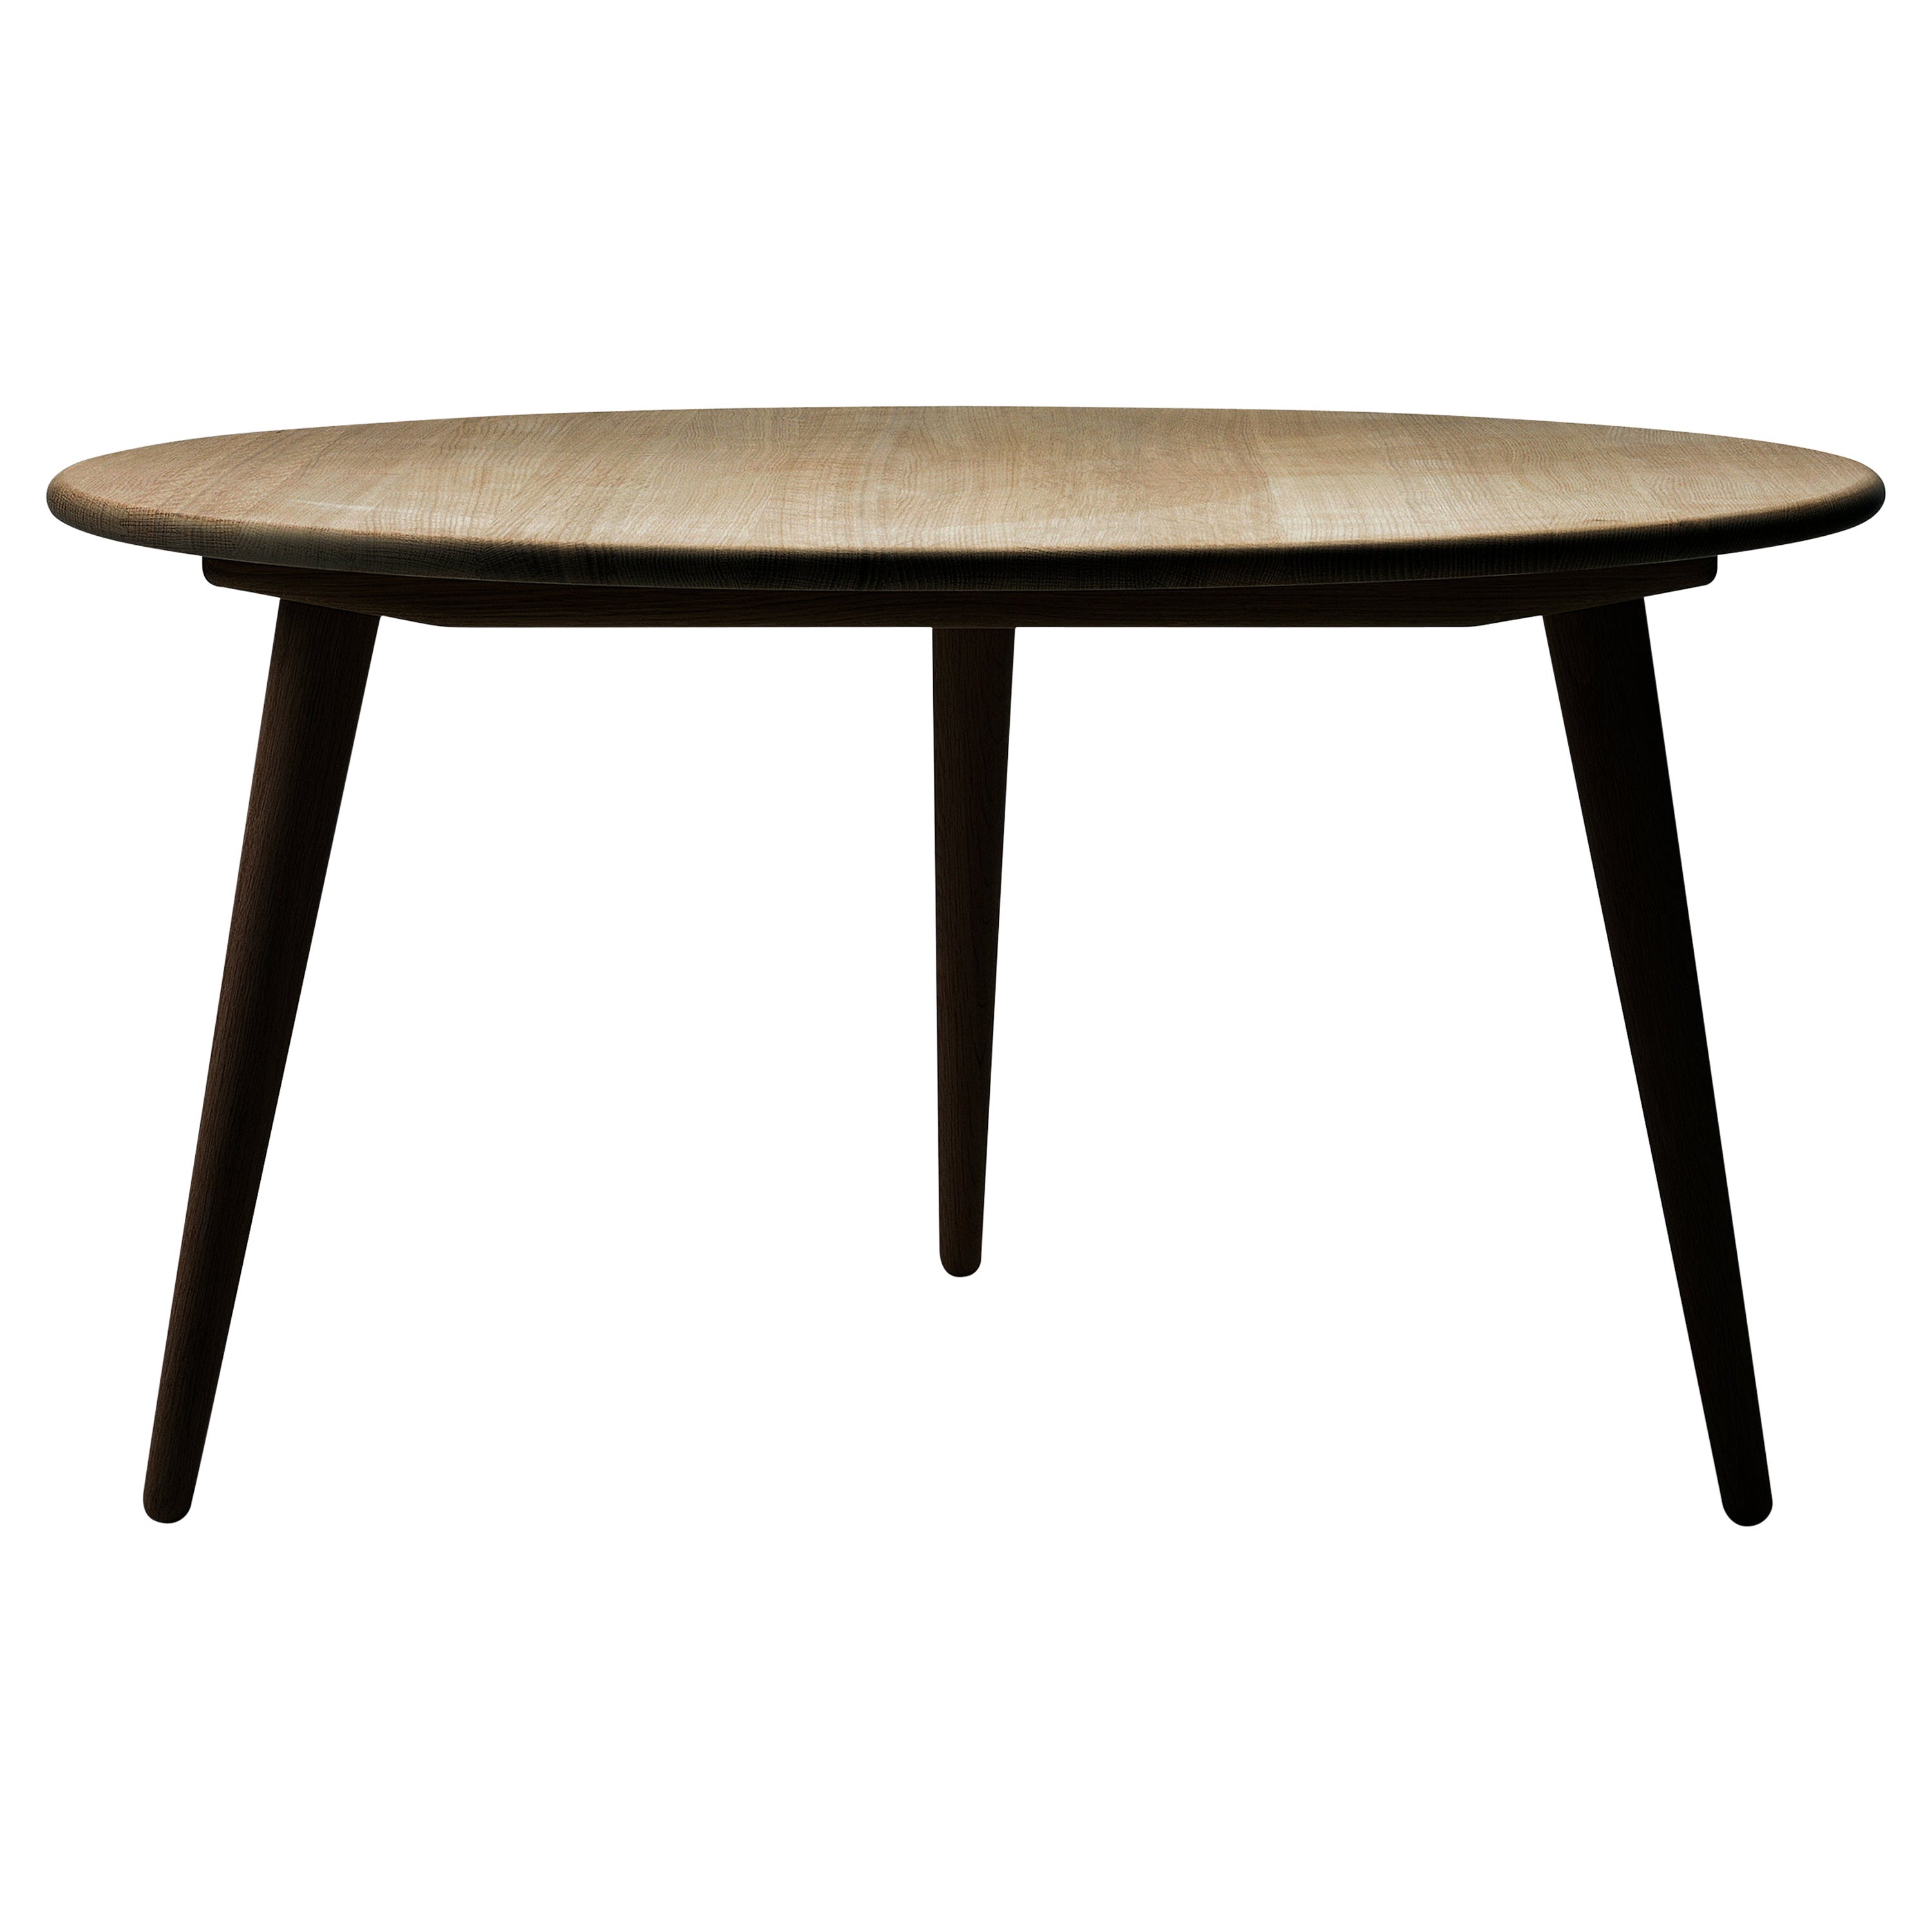 CH008 Small Coffee Table in Walnut Lacquer by Hans J. Wegner